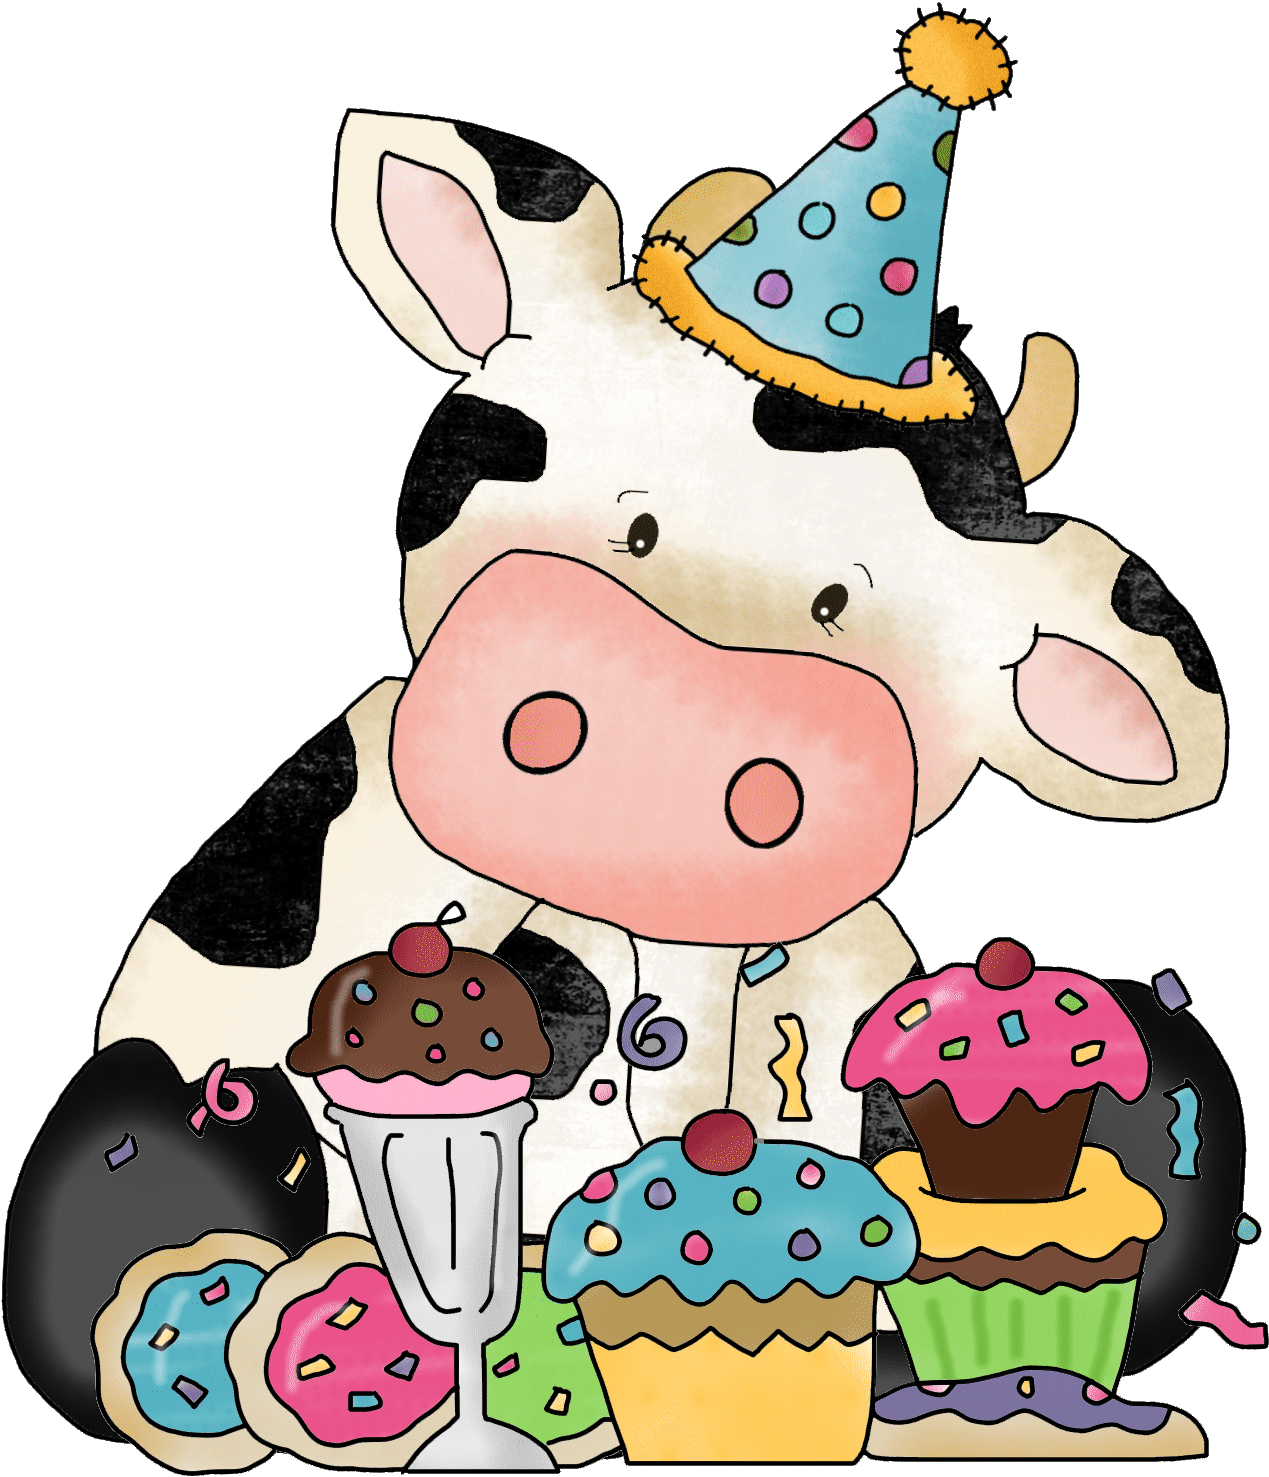  best cow images. Clipart birthday cracker